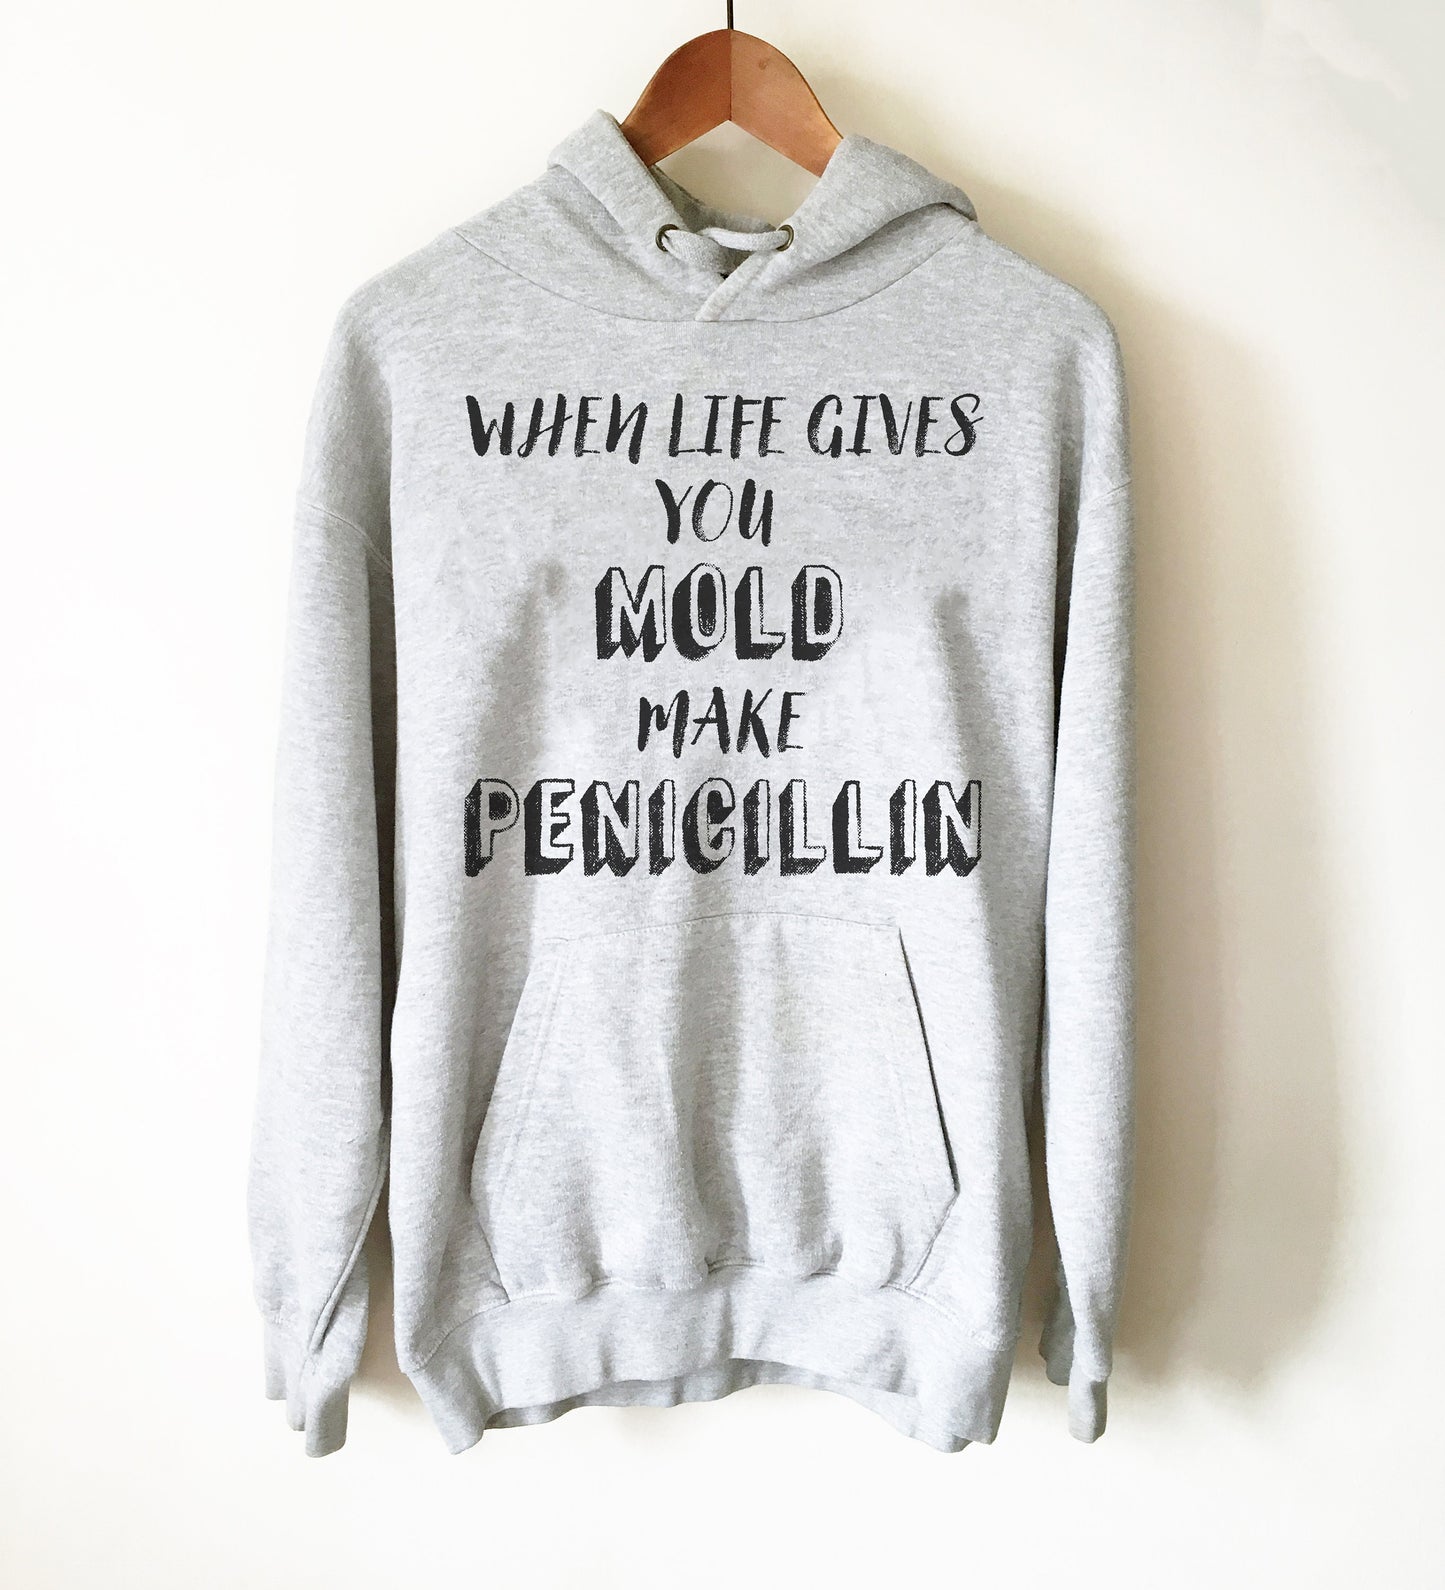 When Life Gives You Mold Make Penicillin Hoodie - Microbiologist Shirt, Microbiology Gift, Medical School Gift, Chemist Shirt, Biology Shirt